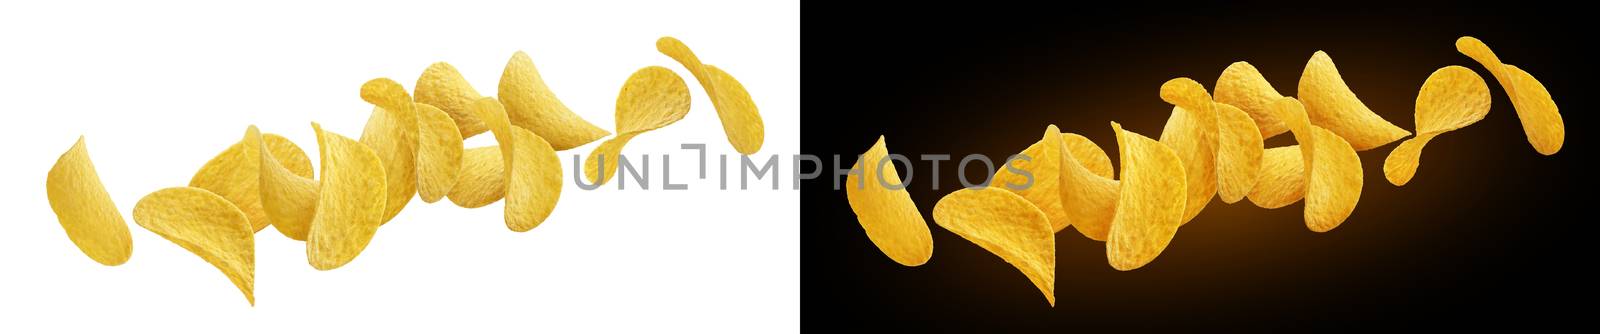 Falling potato chips isolated on white and black backgrounds by xamtiw